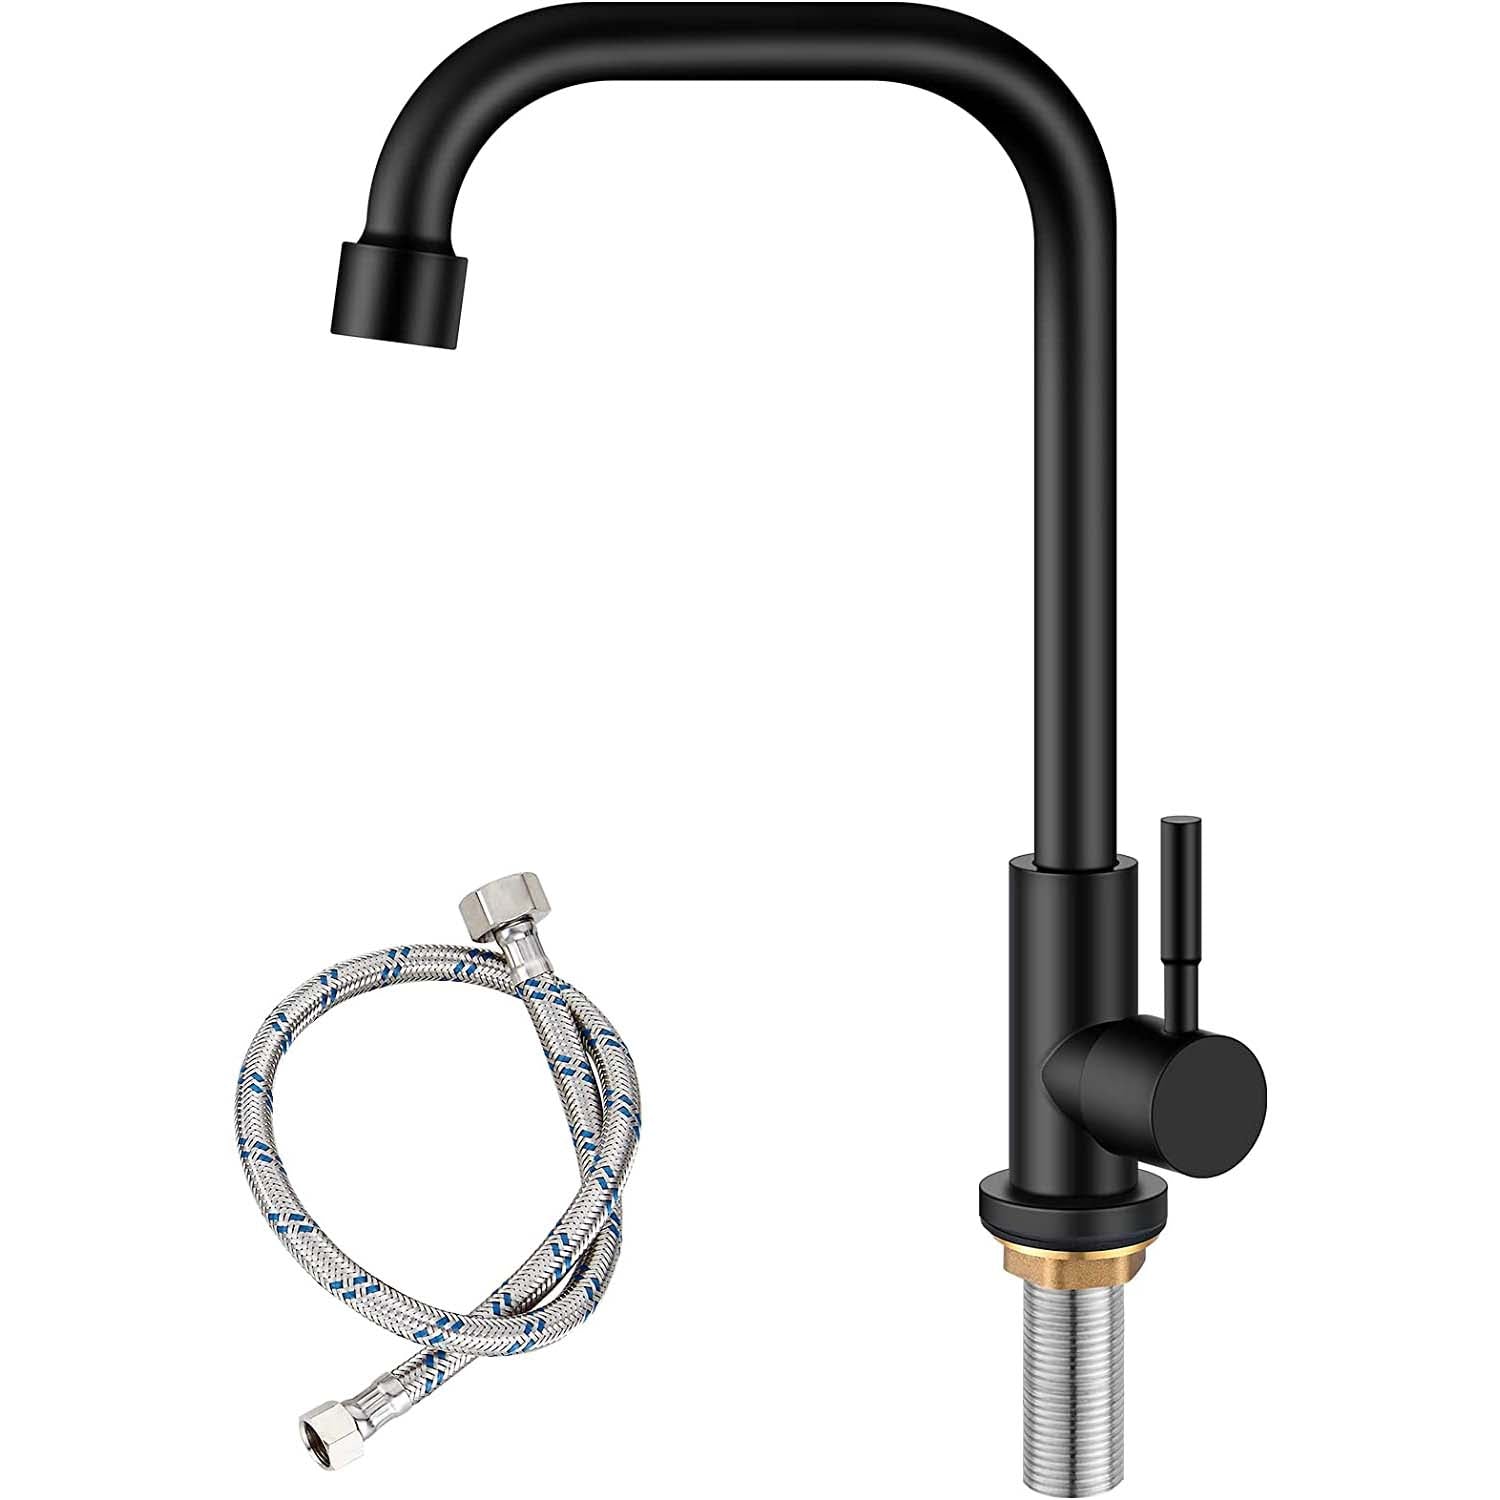 Cold Water OnlySingle Lever Handle SUS304 Sink Bar Tap 360 Degree Swivel Spout Decked Mounted Longer Thread Pipe